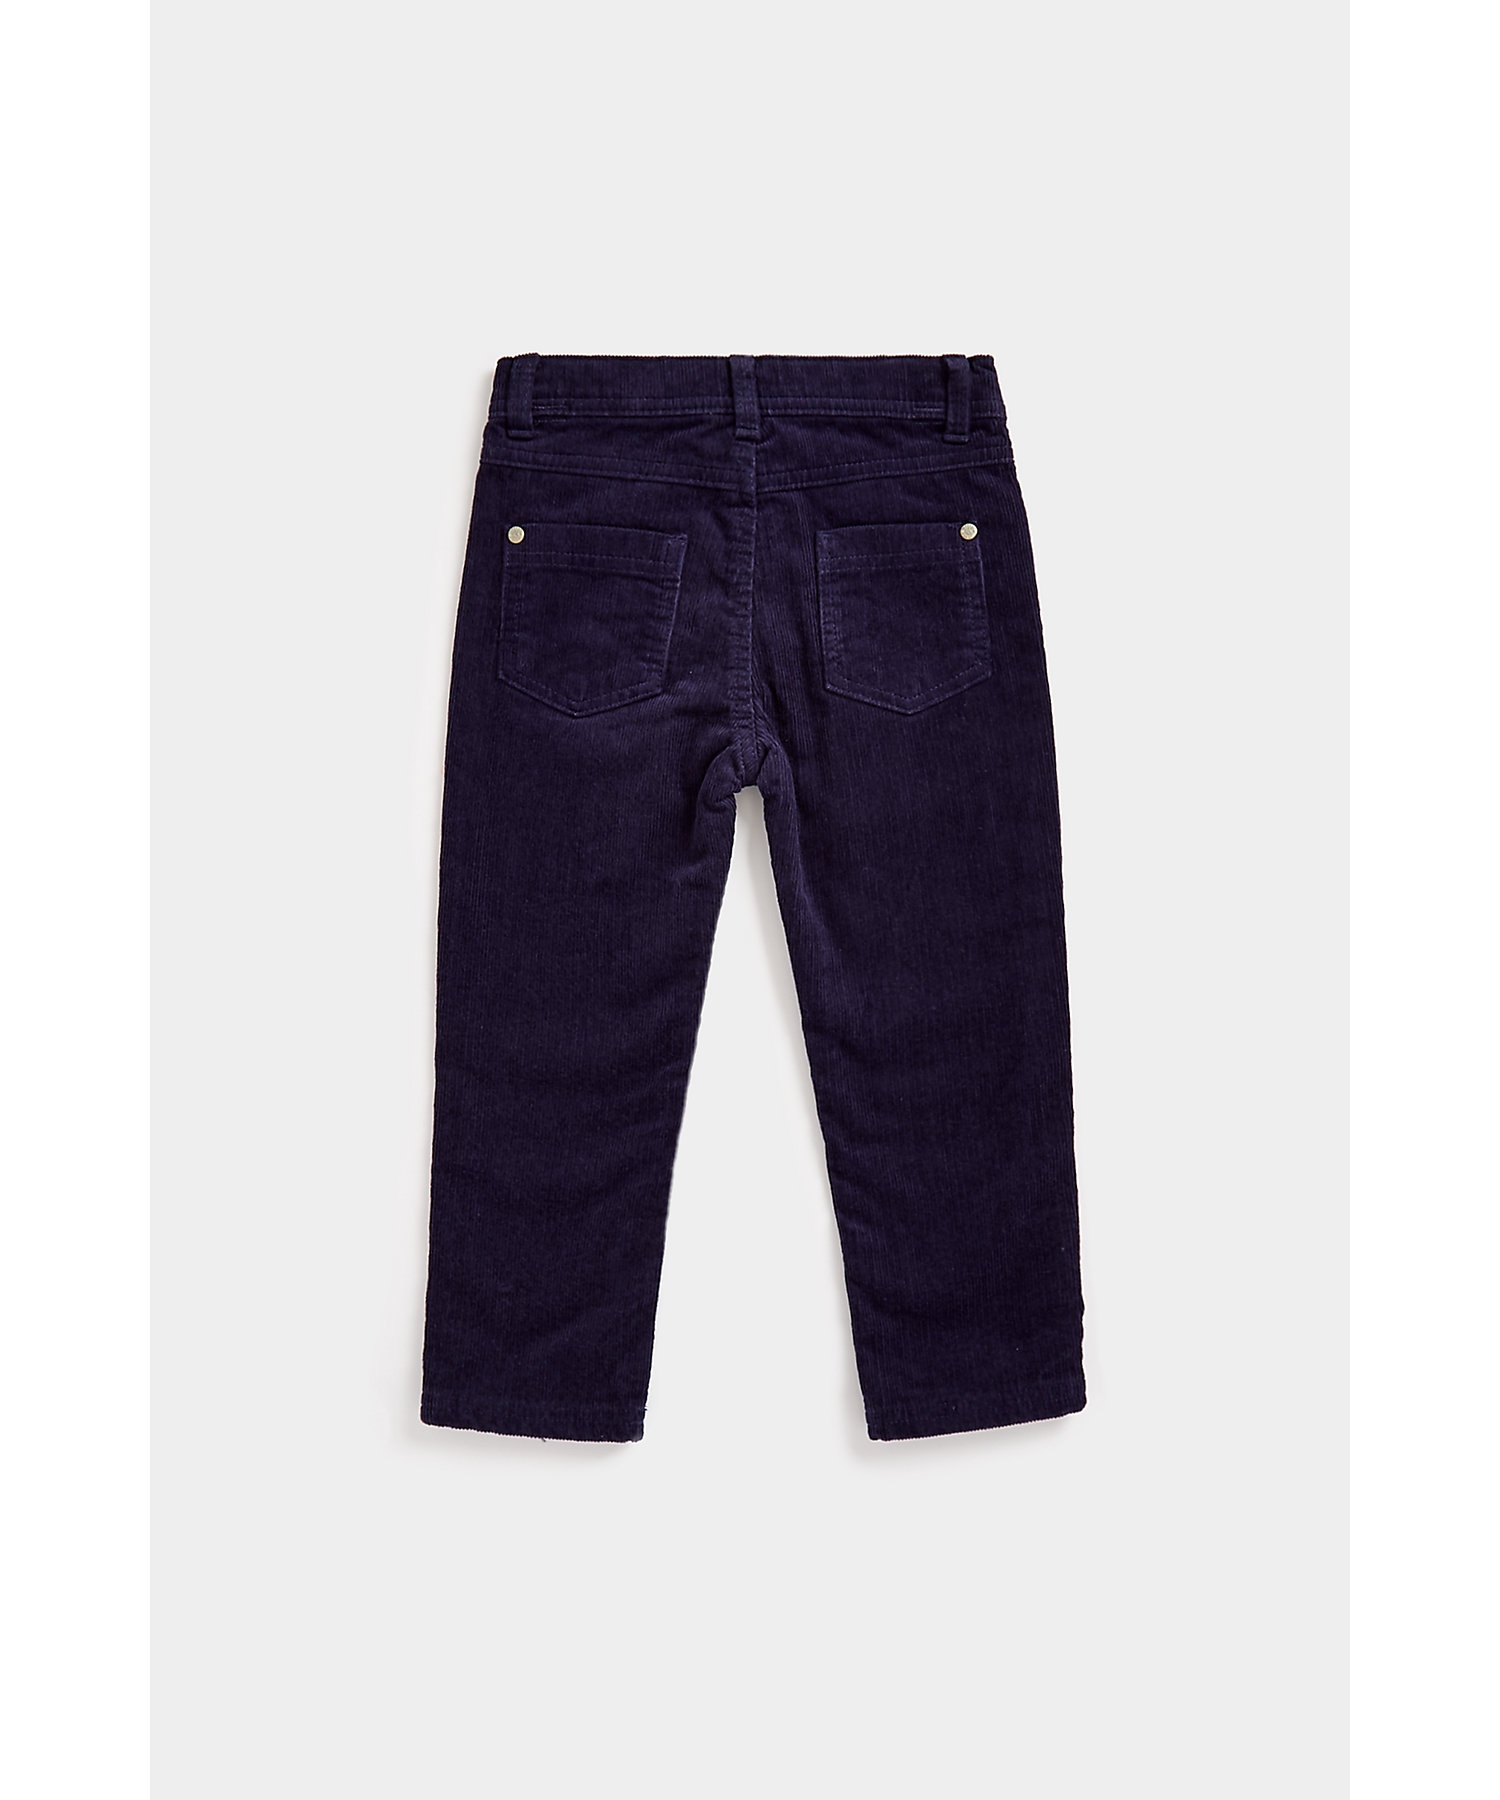 Mothercare | Boys Corduroy Trousers -Navy 1